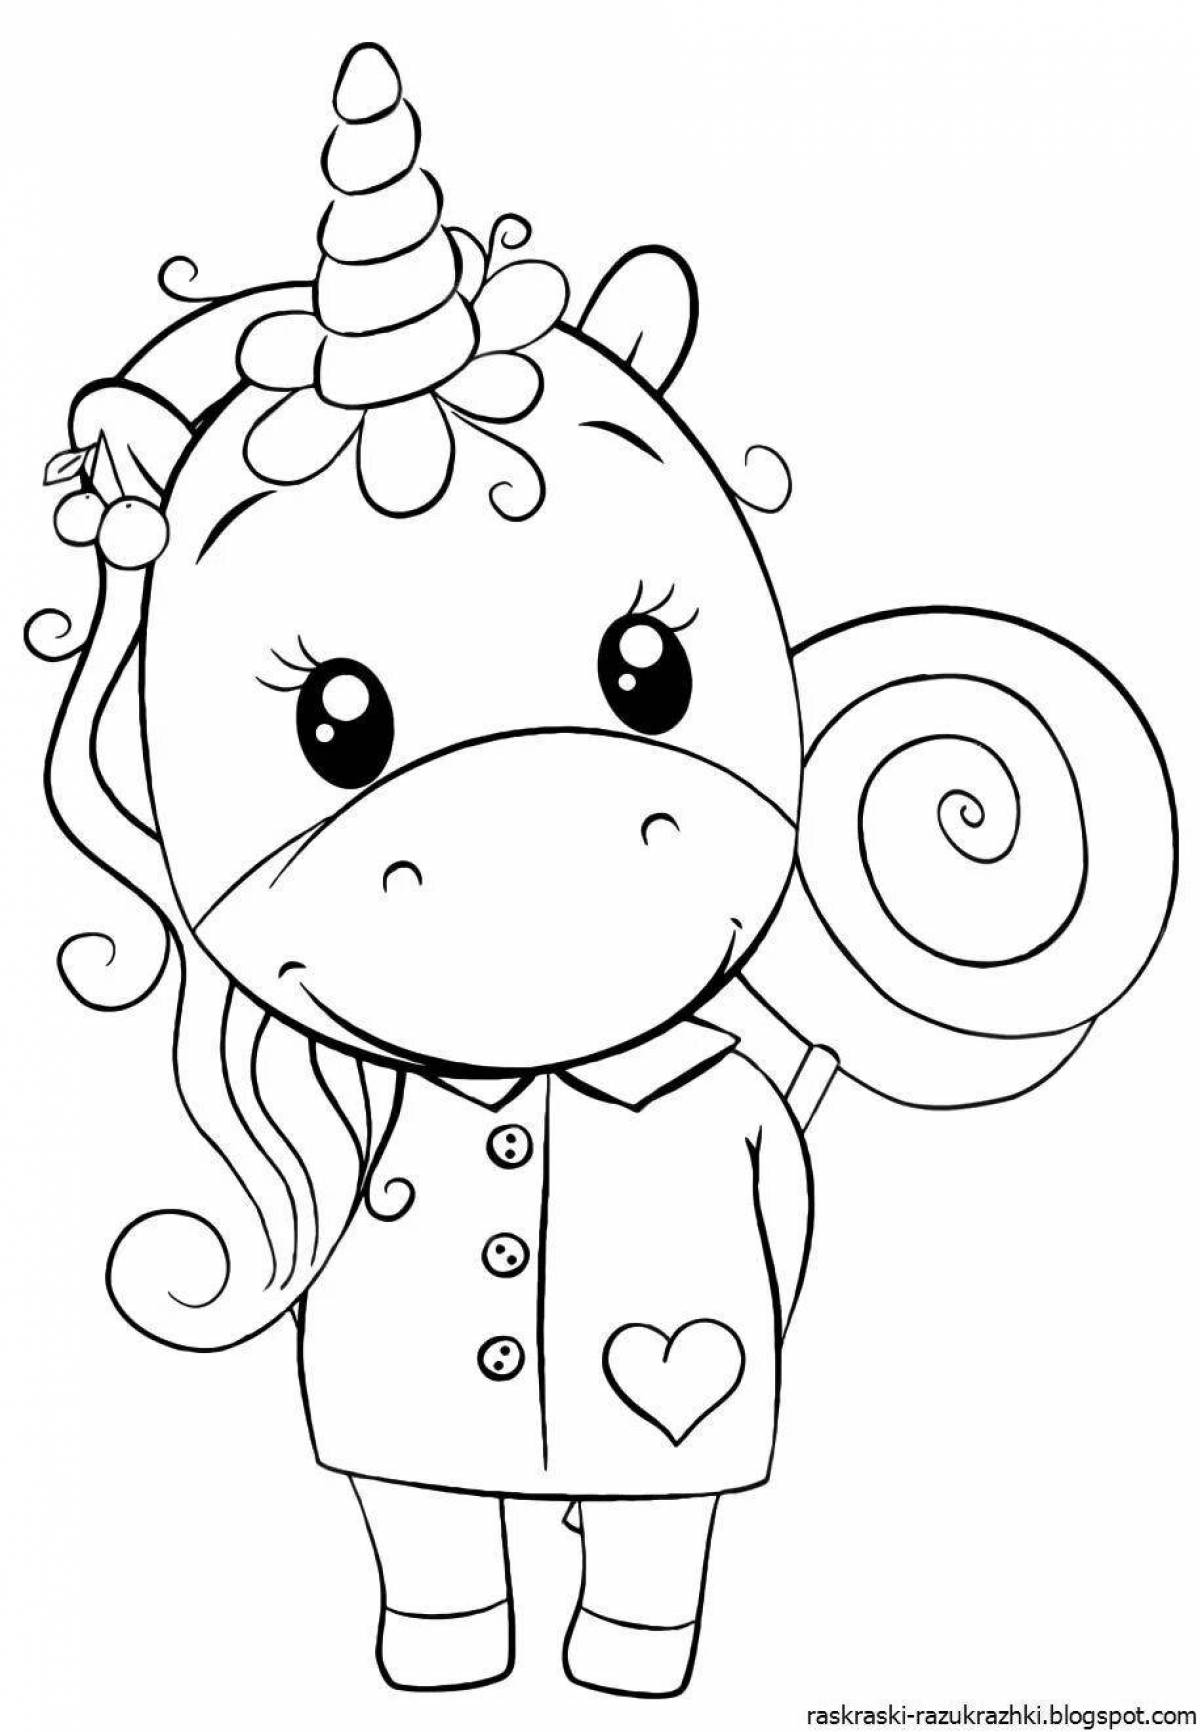 Cute unicorn animal coloring book for girls